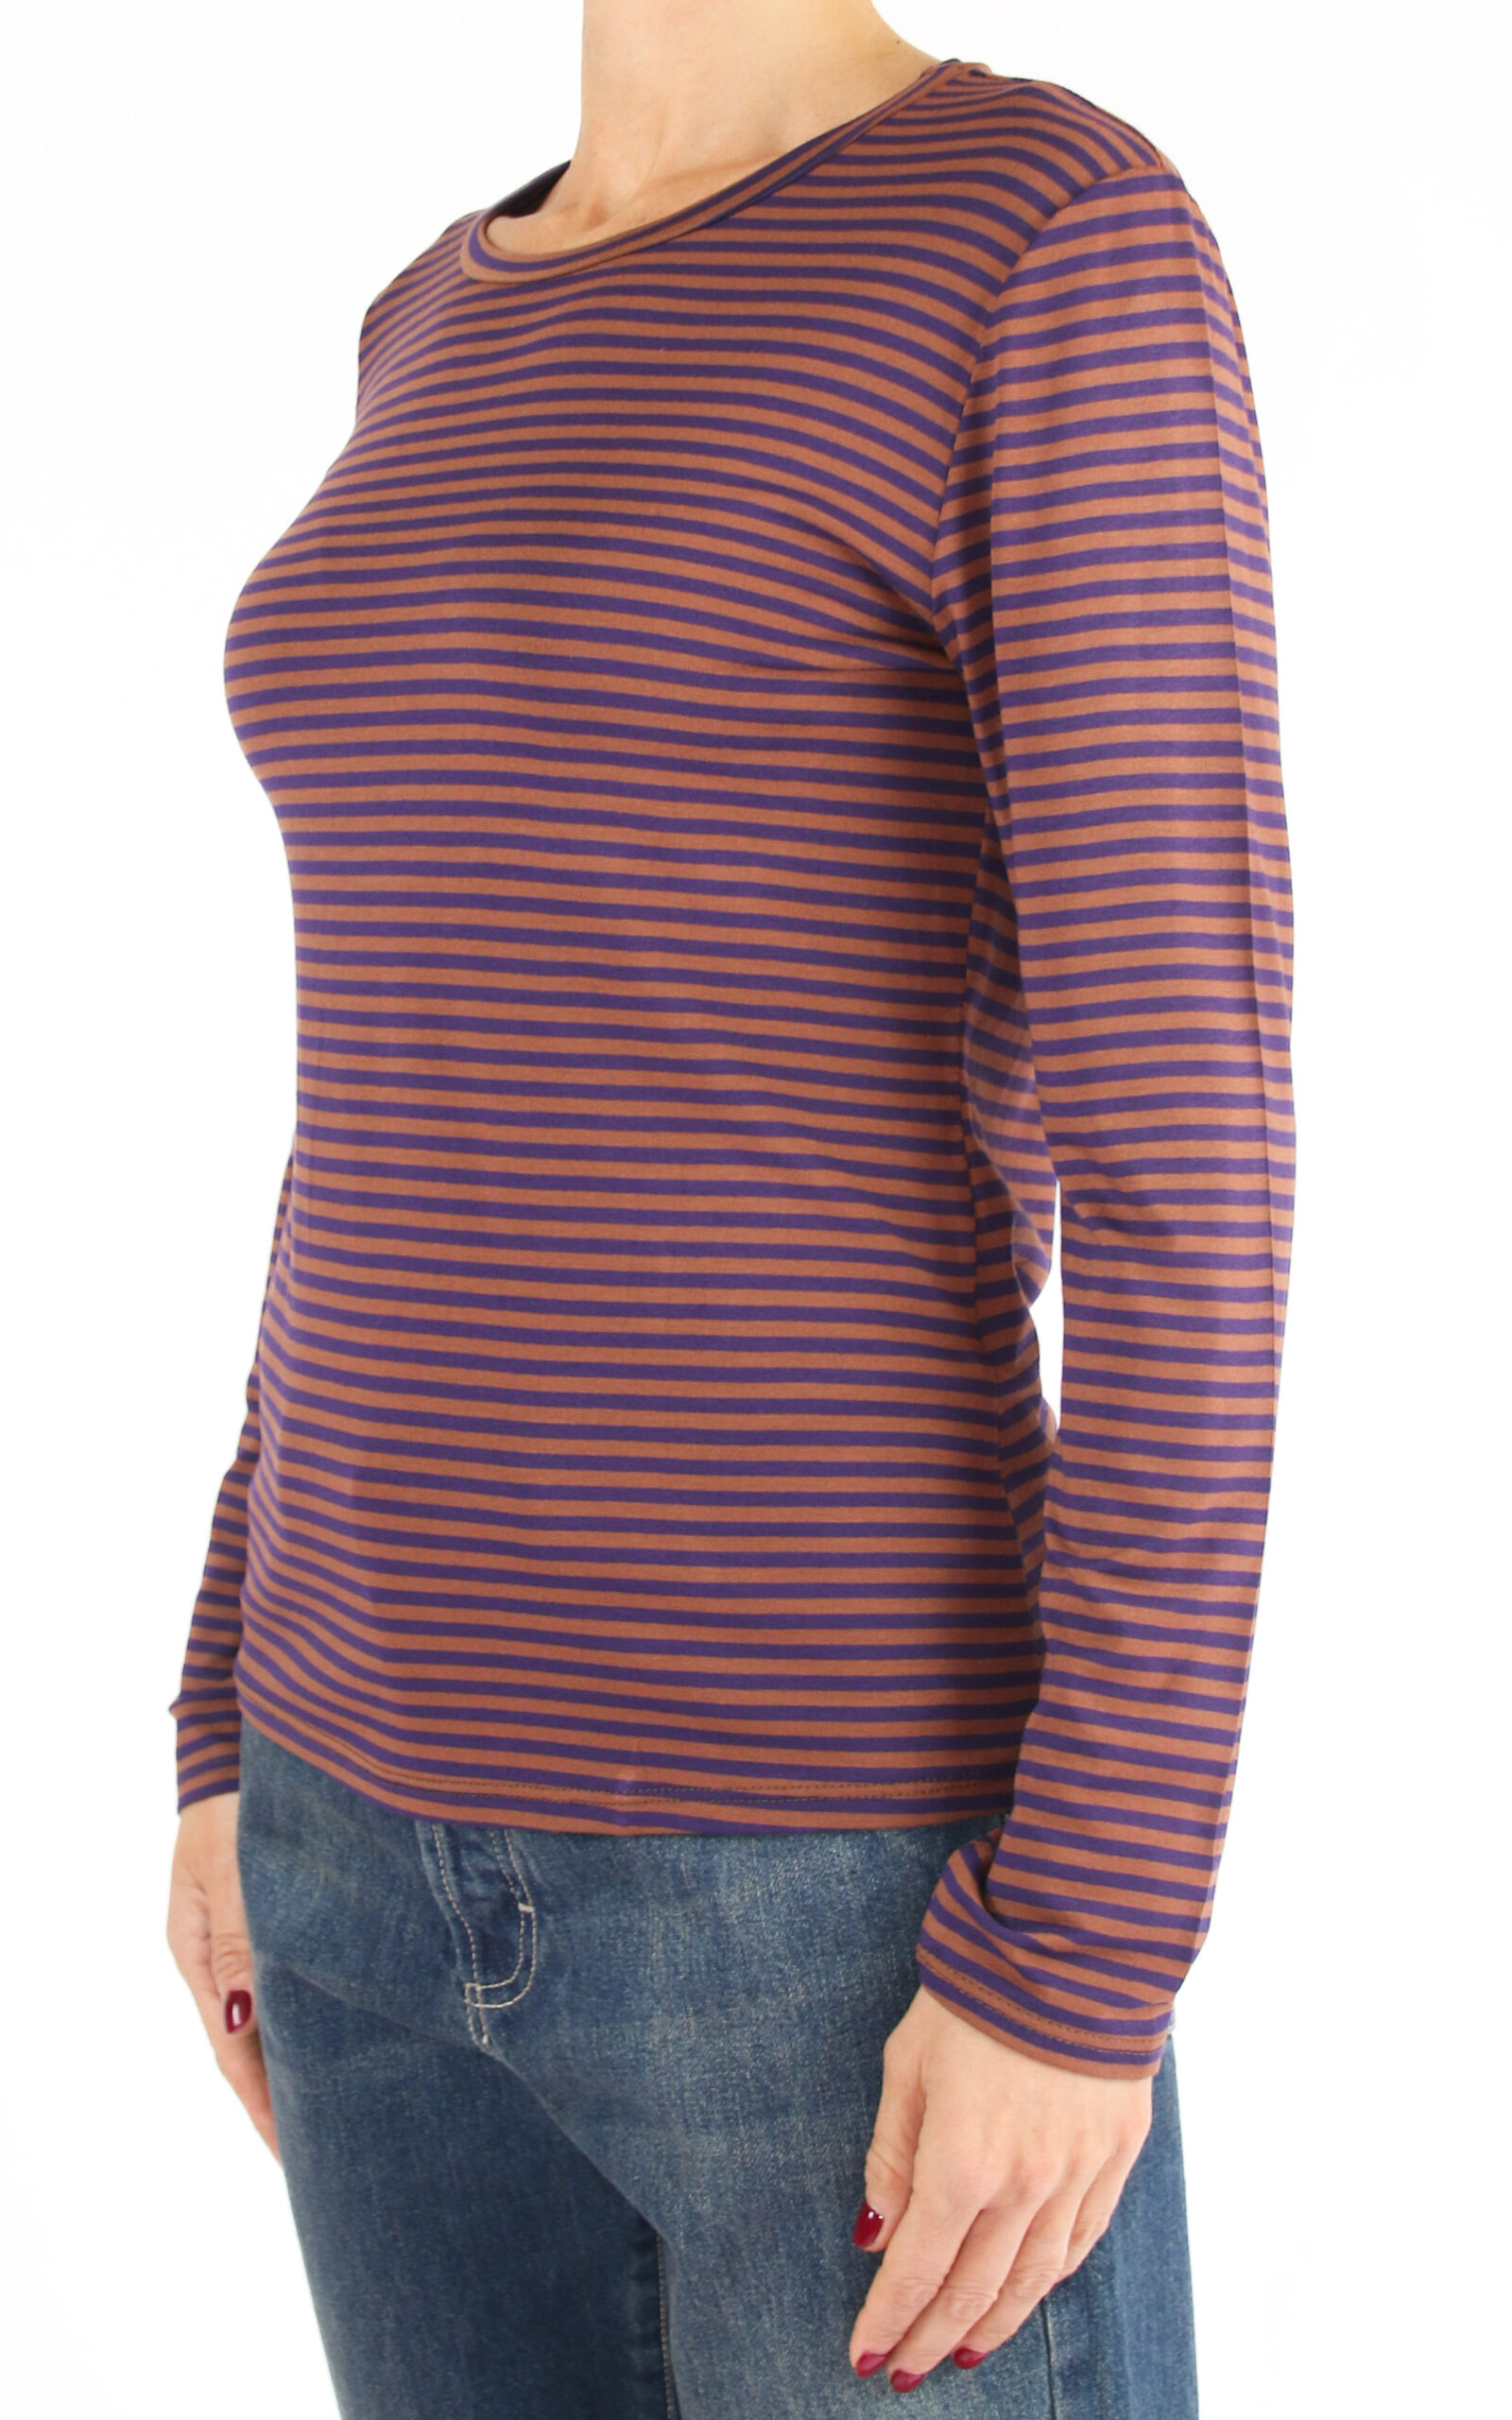 Off-On - t-shirt slim a righe - viola/camel